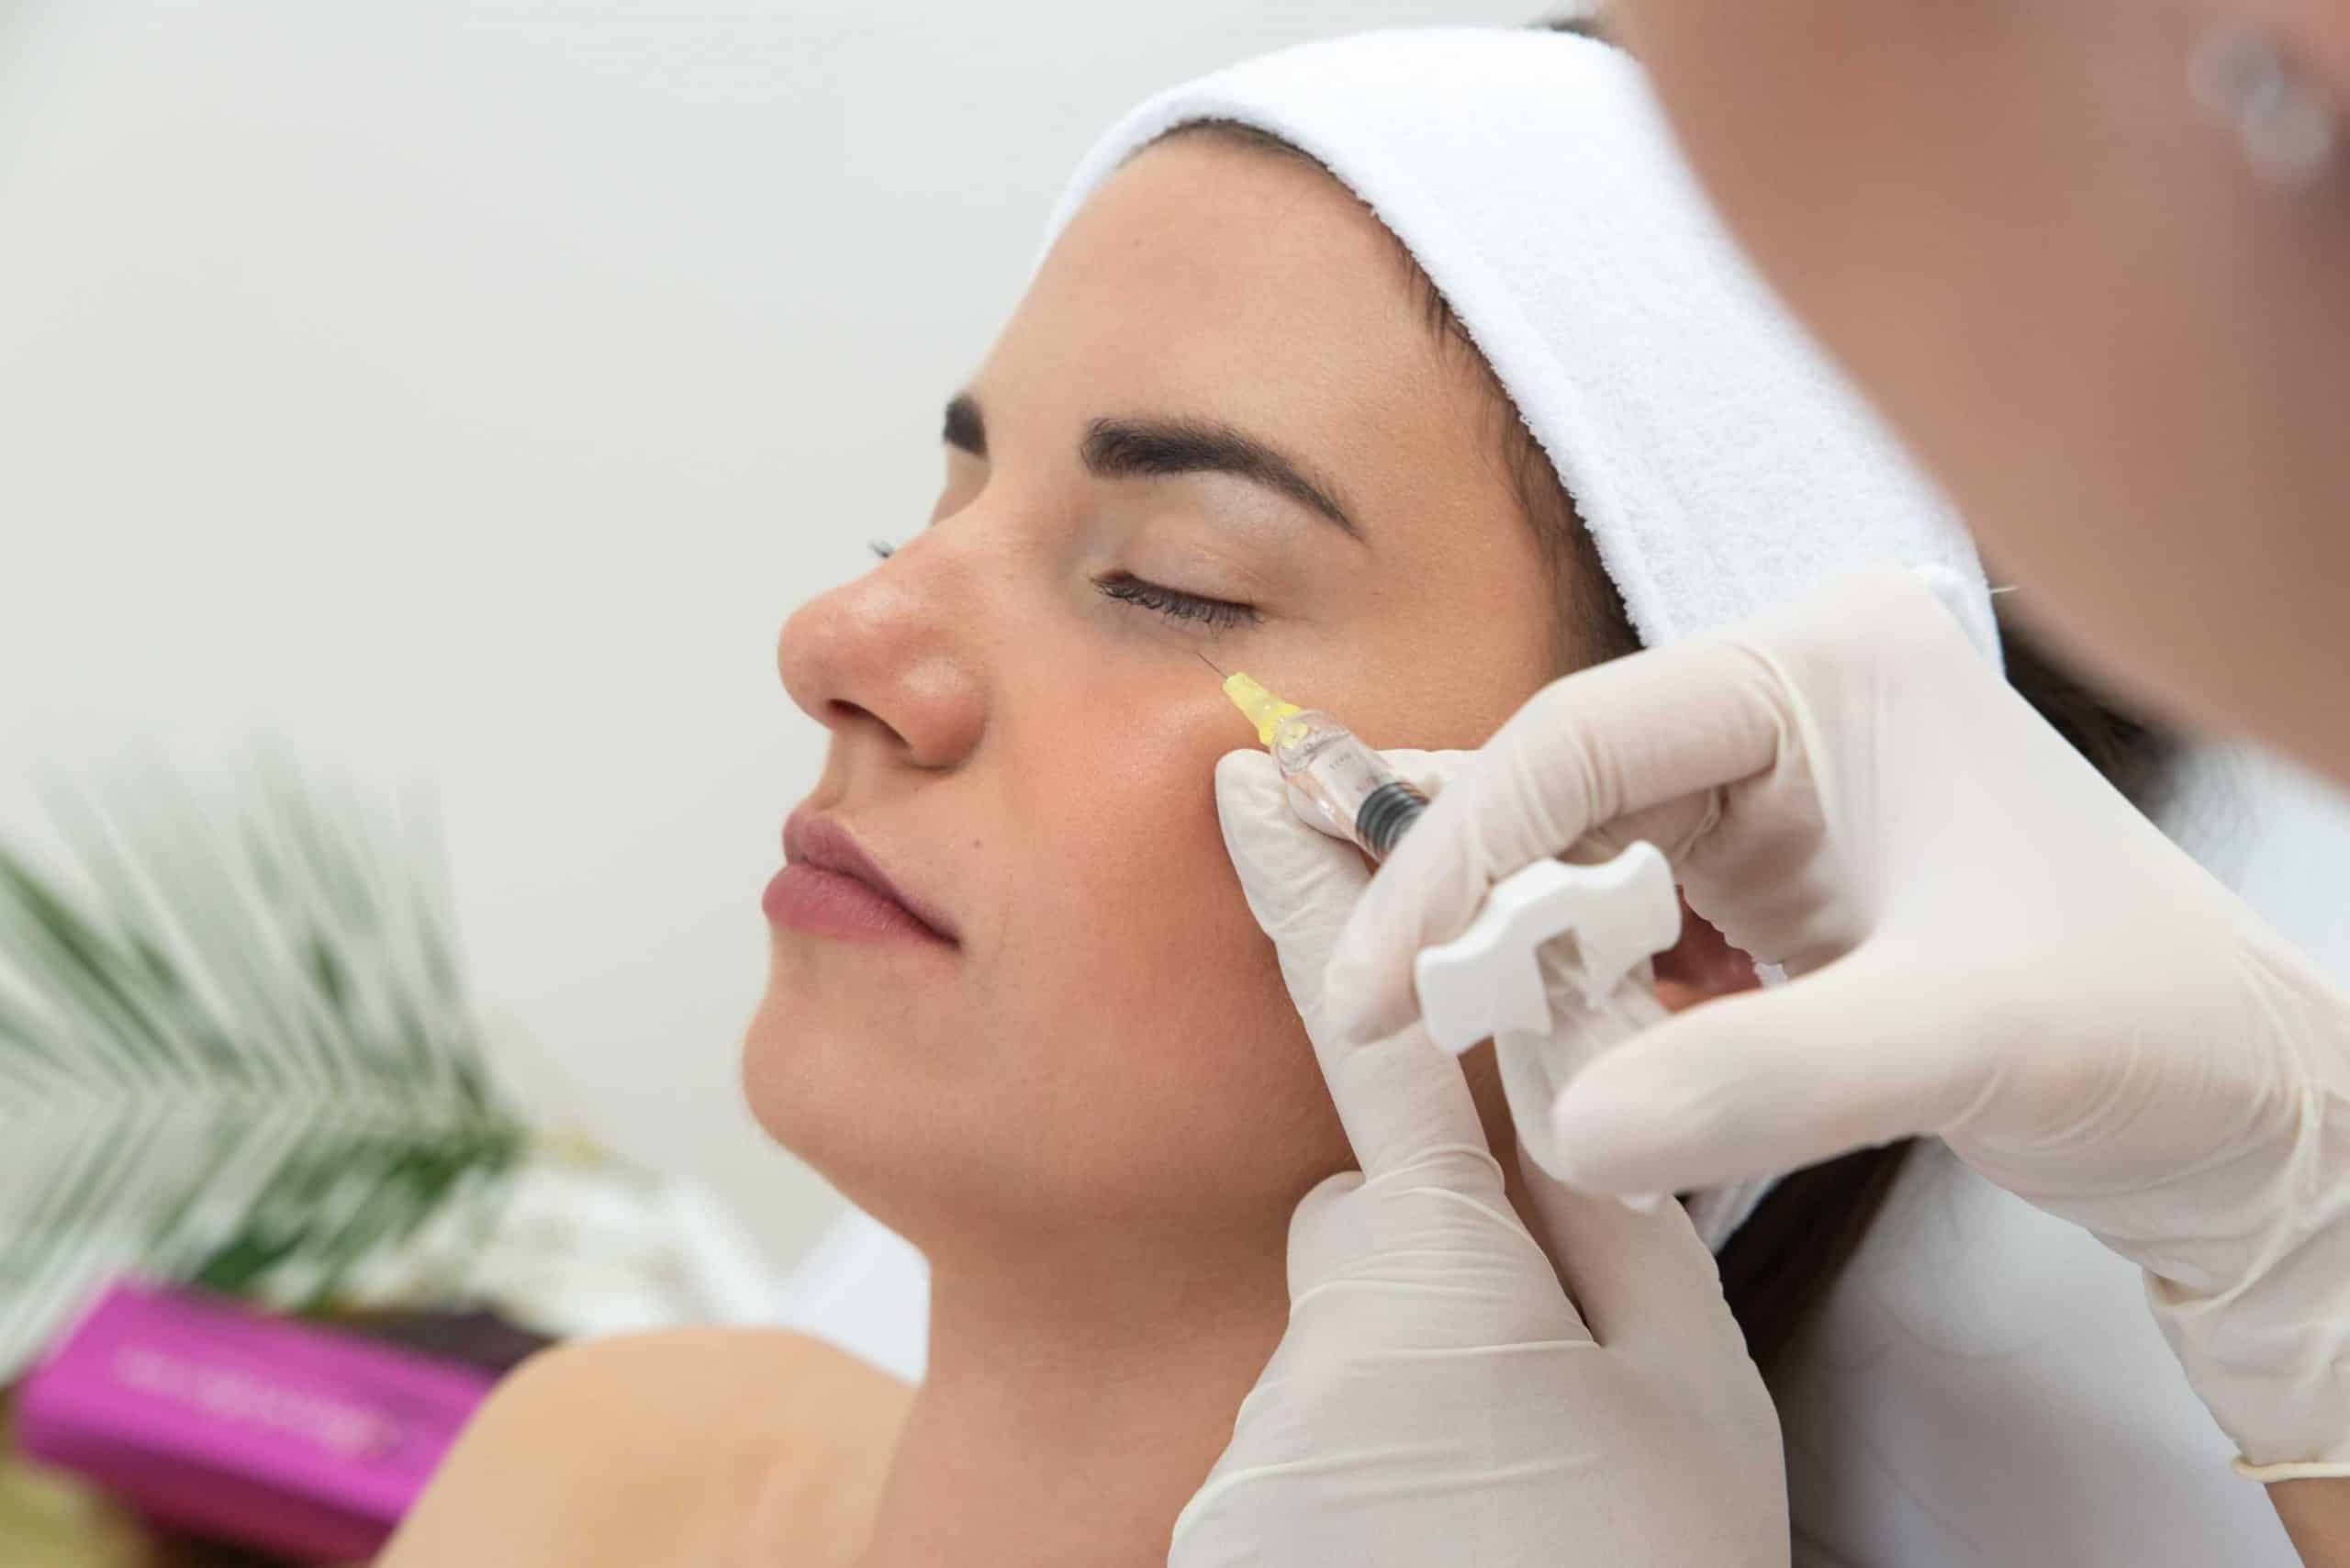 WHAT IS JUVEDERM USED FOR? IS IT BETTER THAN BOTOX?